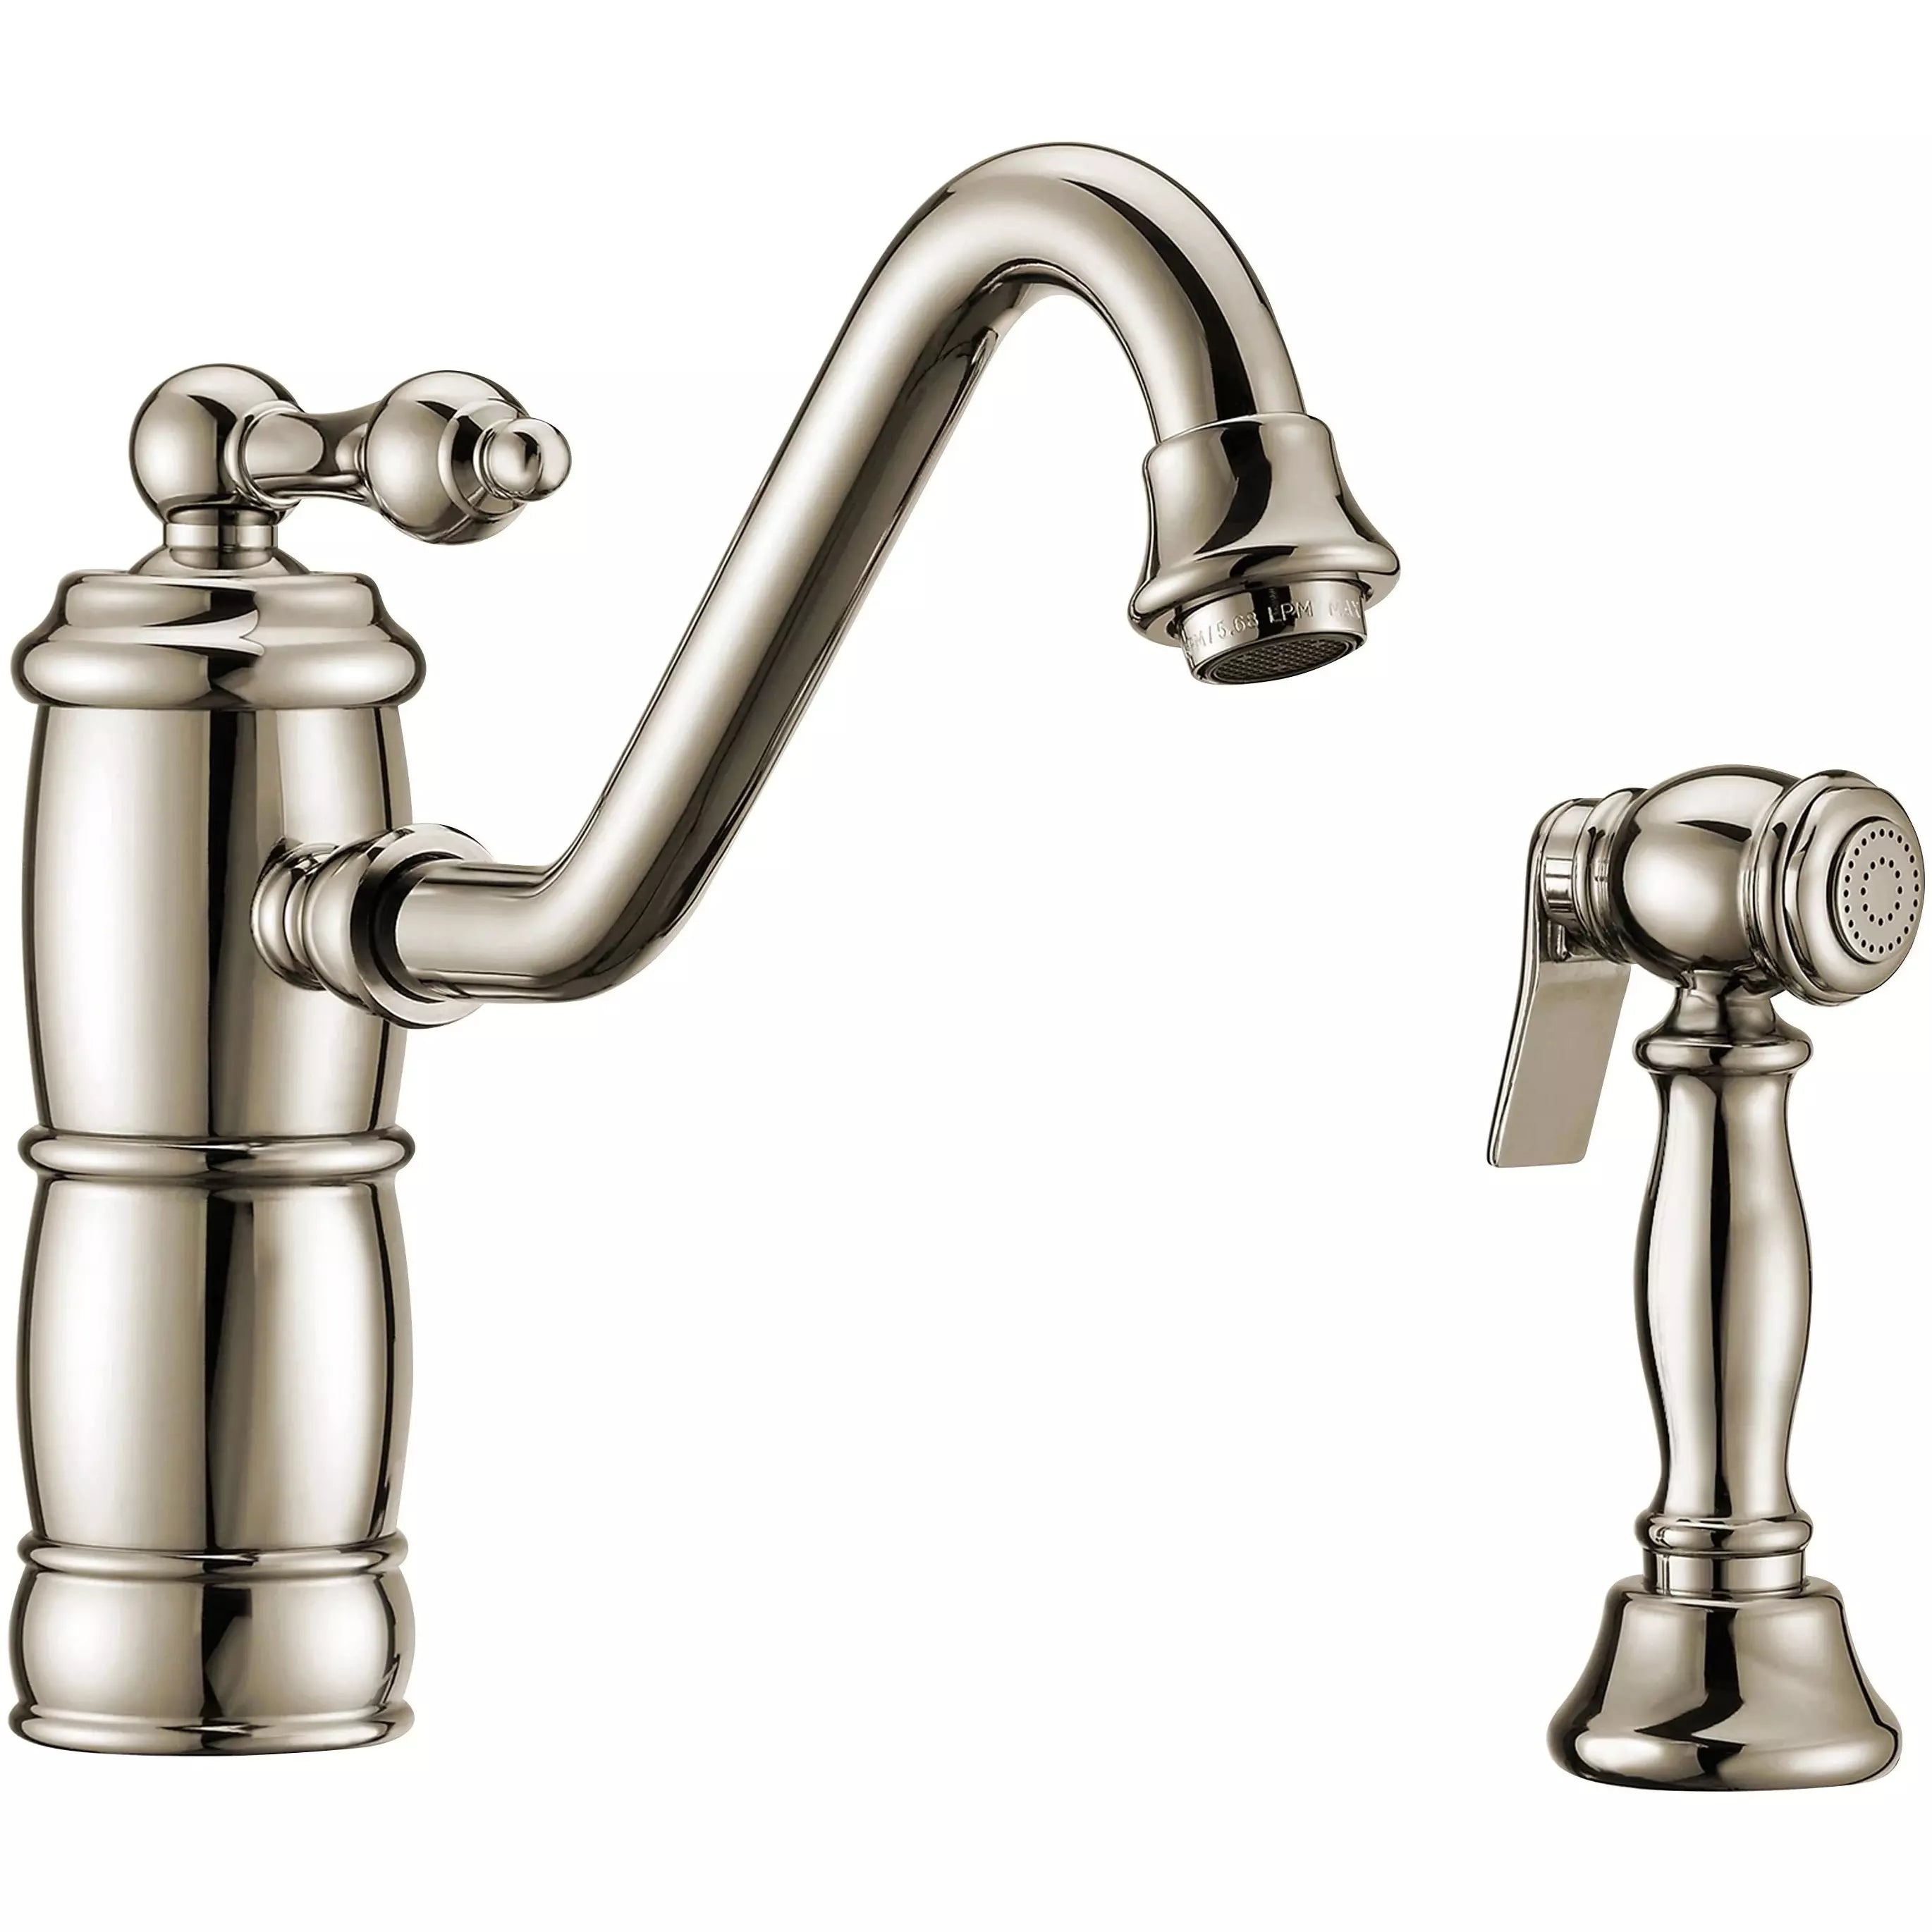 WHITEHAUS Vintage III plus Single Lever Faucet with Traditional Swivel Spout and Solid Brass Side Spray - WHKTSL3-2200-NT